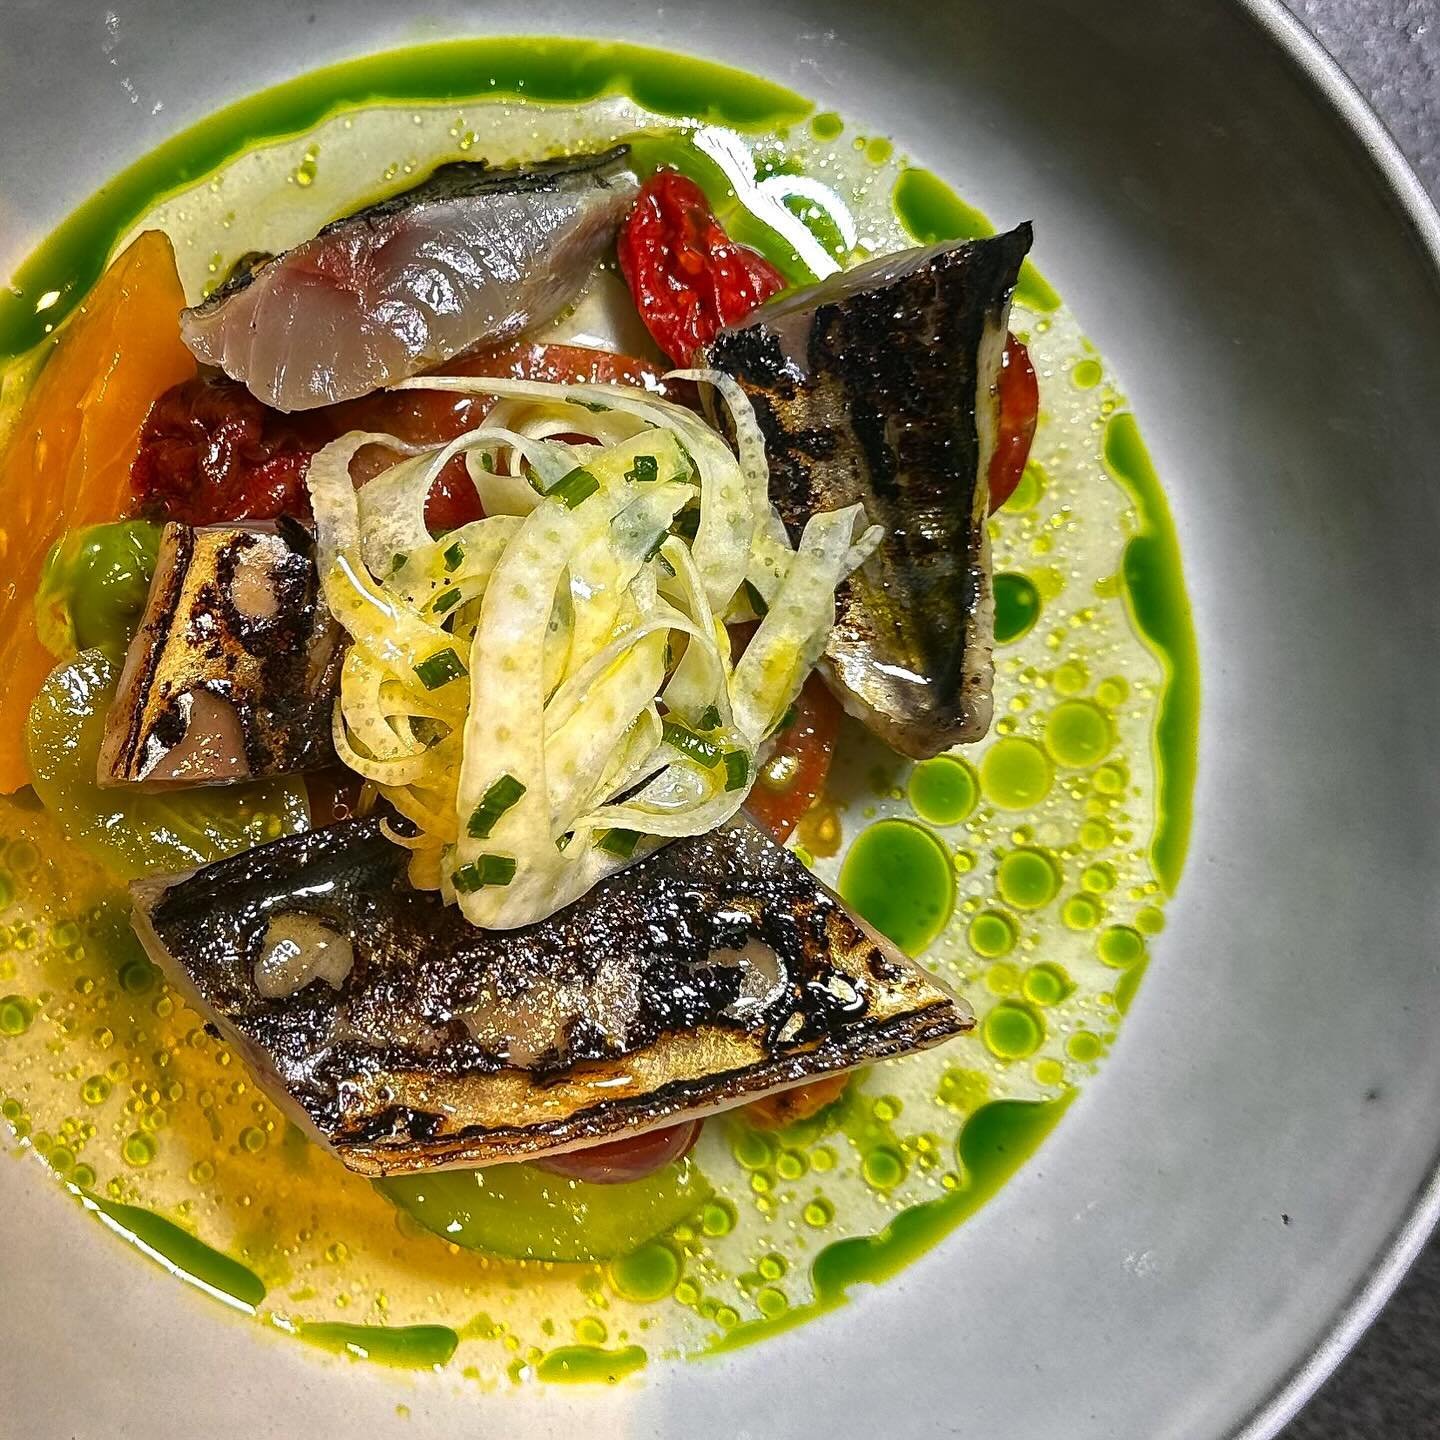 Cured Mackerel | Heritage Tomato | Fennel | Nasturtium 
.
.
Spring is finally here and we&rsquo;ve got a great dish to brighten your day and palette. With the arrival of the early season isle of white tomatoes, we have colour and fresh acidity perfec